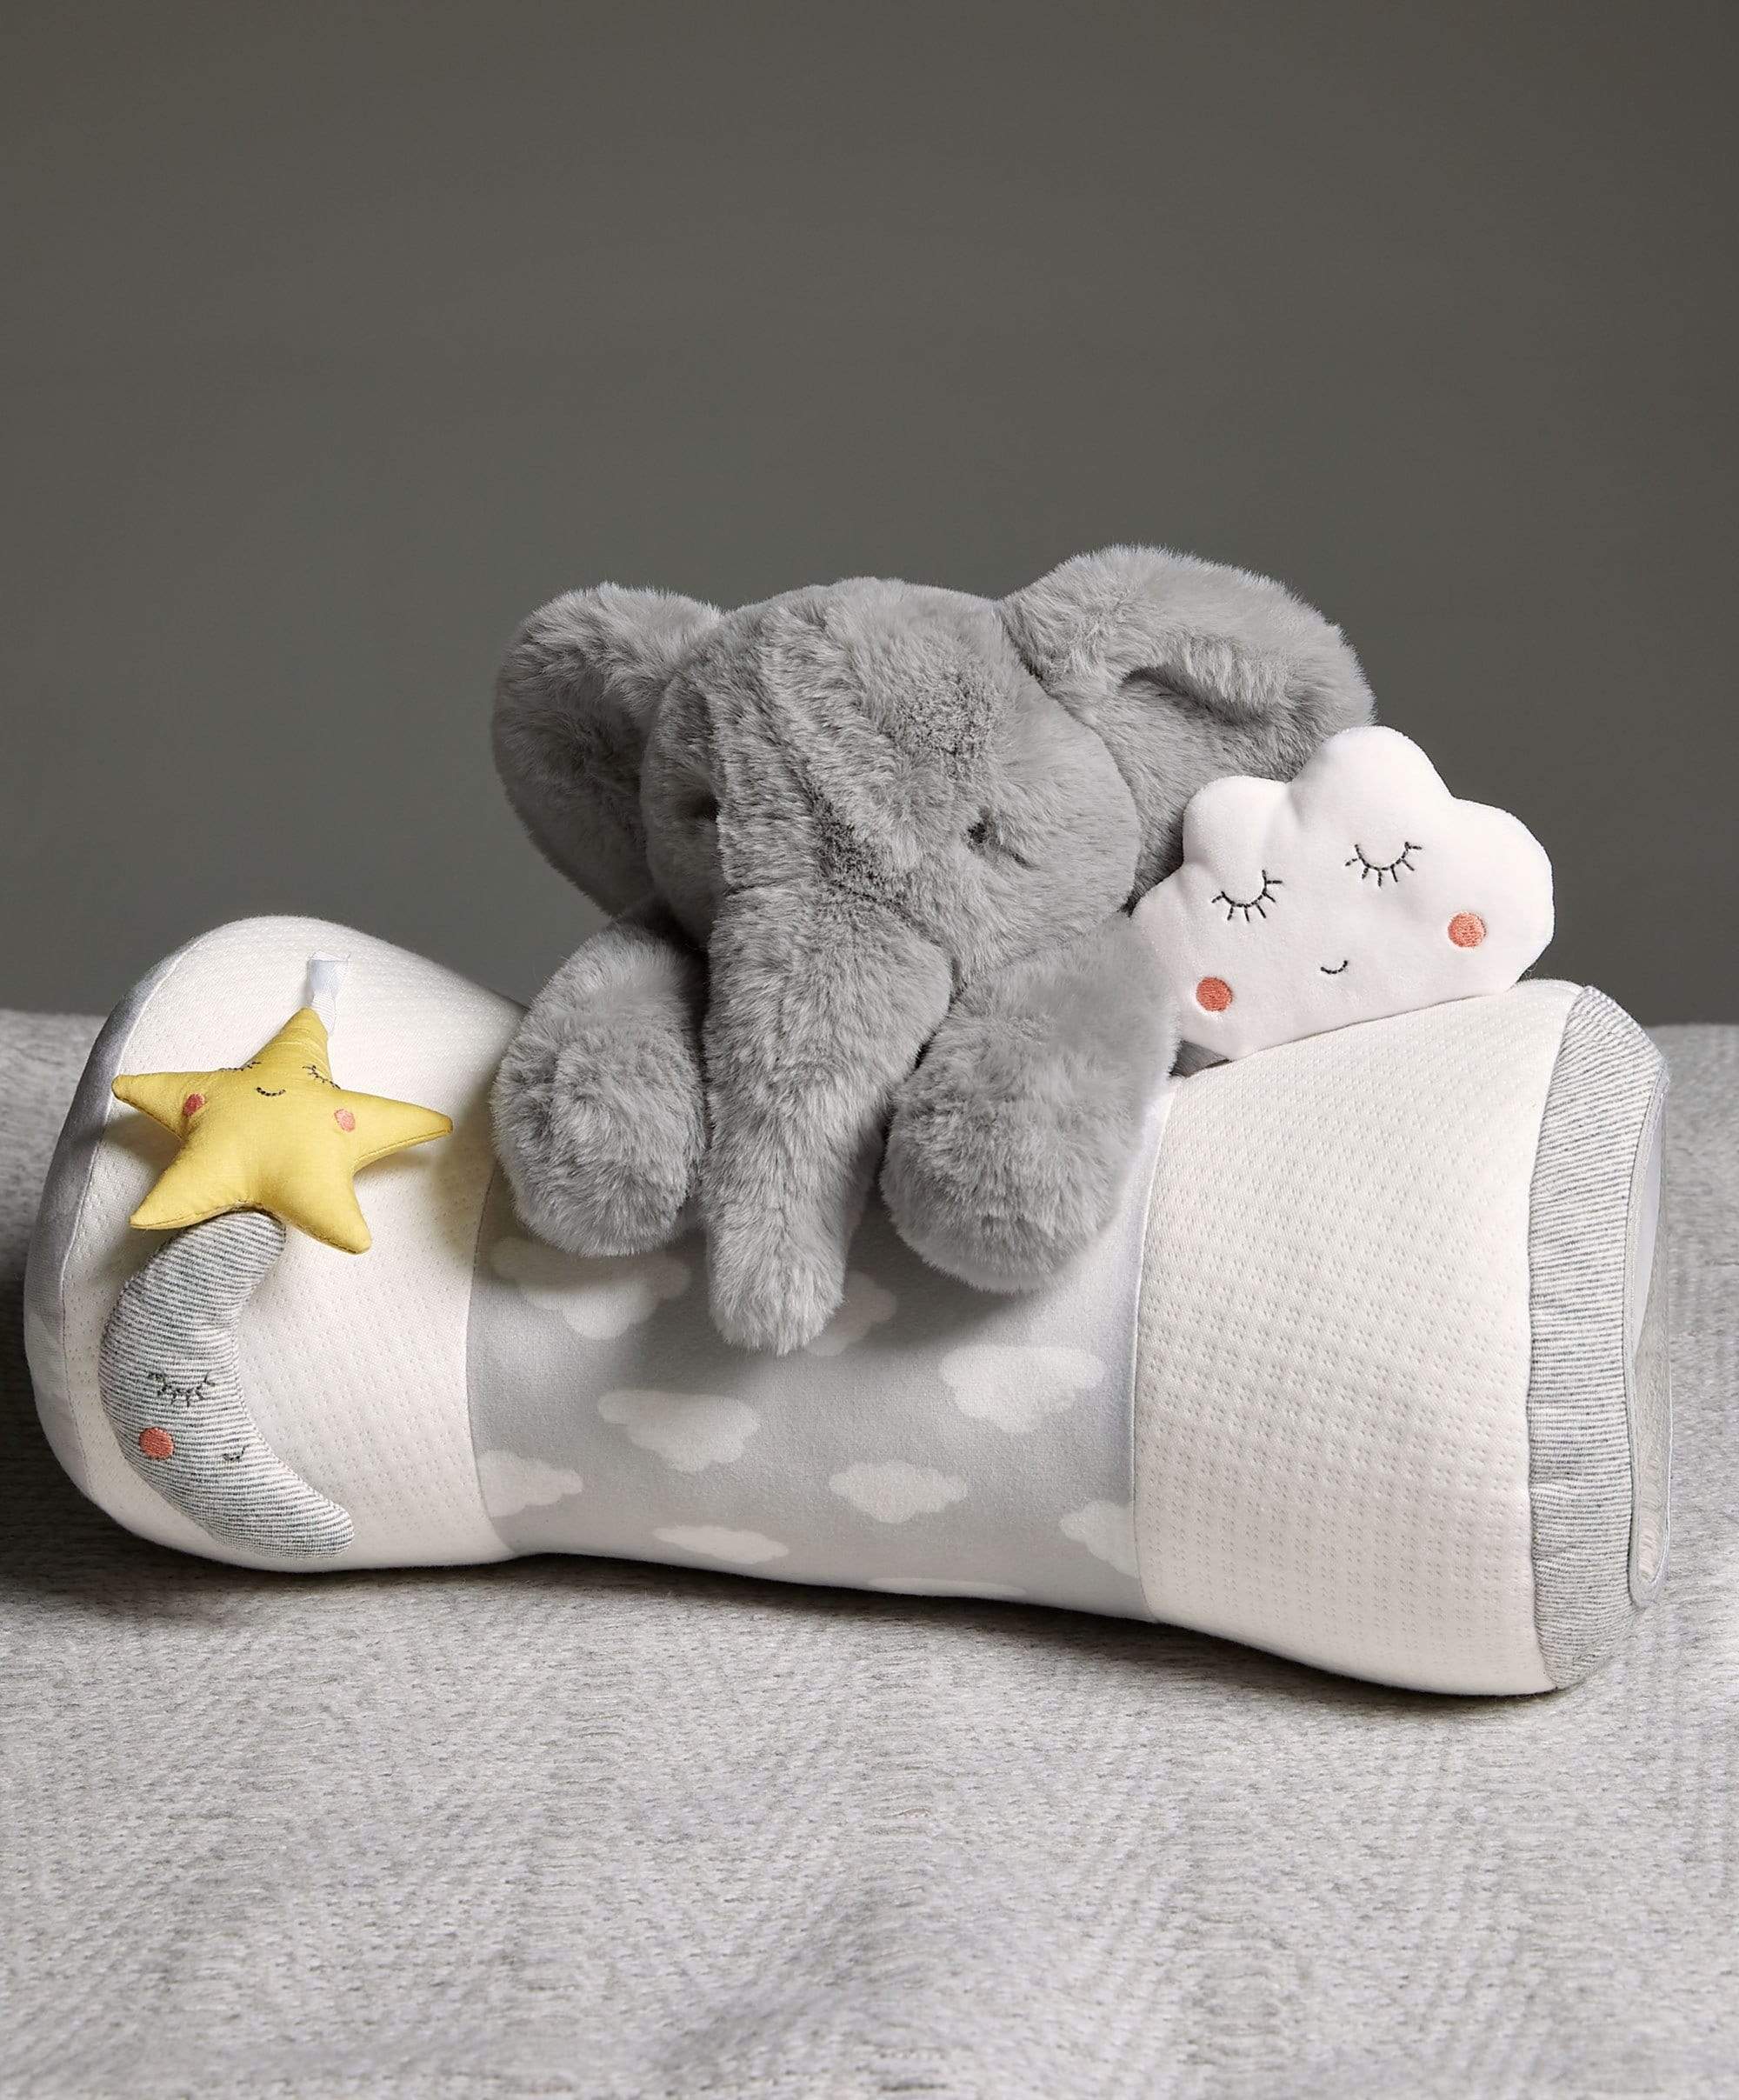 Mamas & Papas Soft Toys Welcome to the World Soft Toy - Archie Elephant